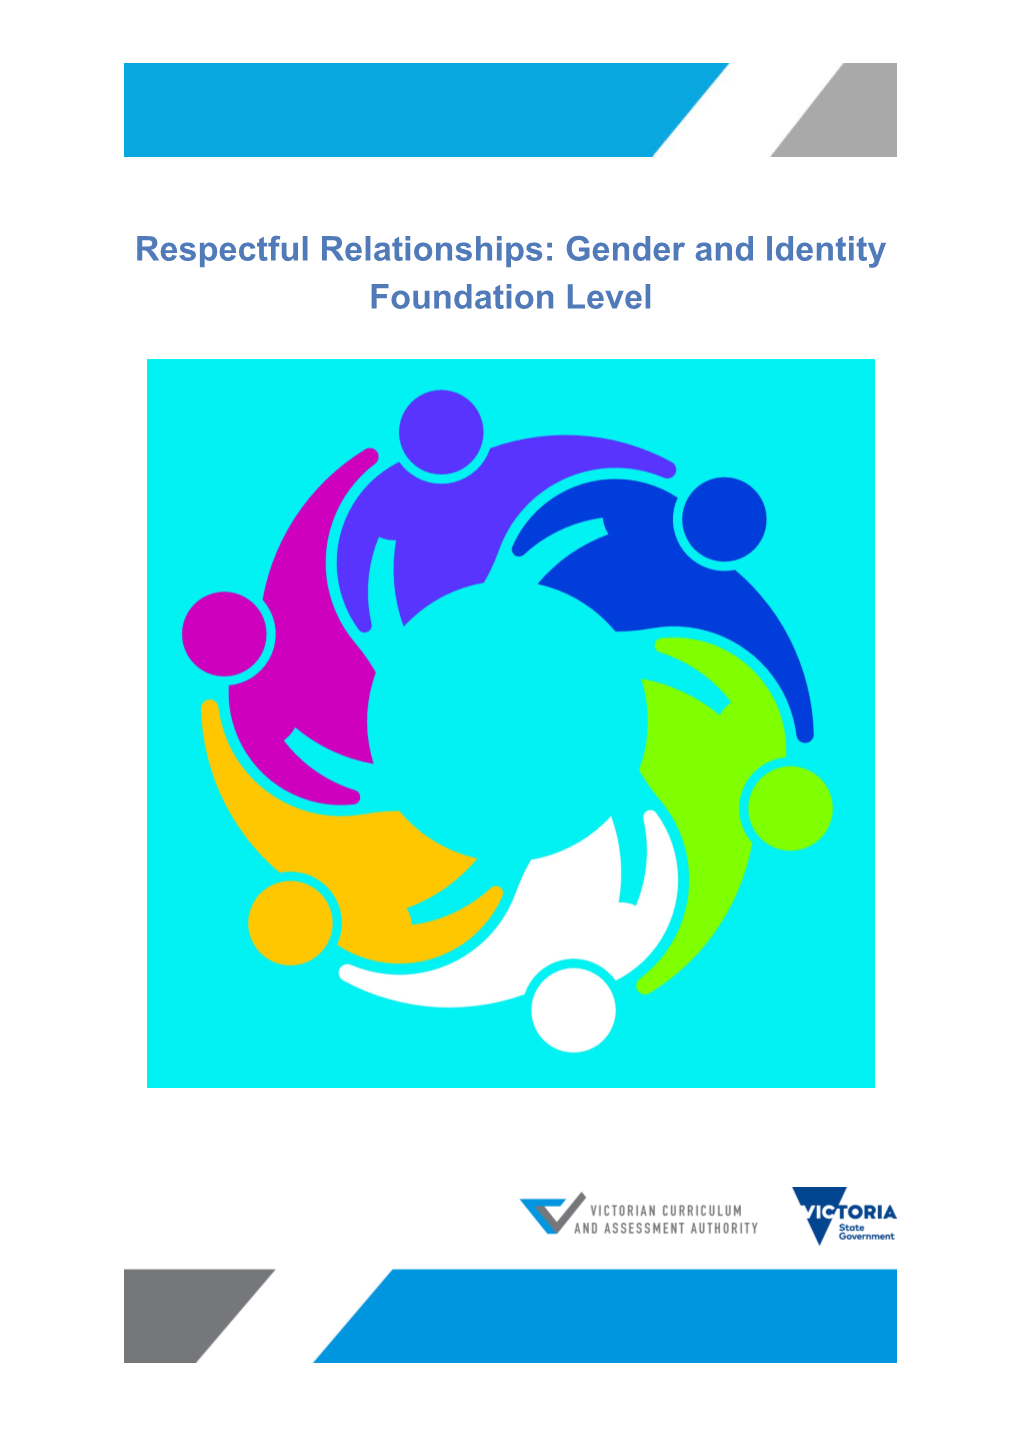 Respectful Relationships: Gender and Identity